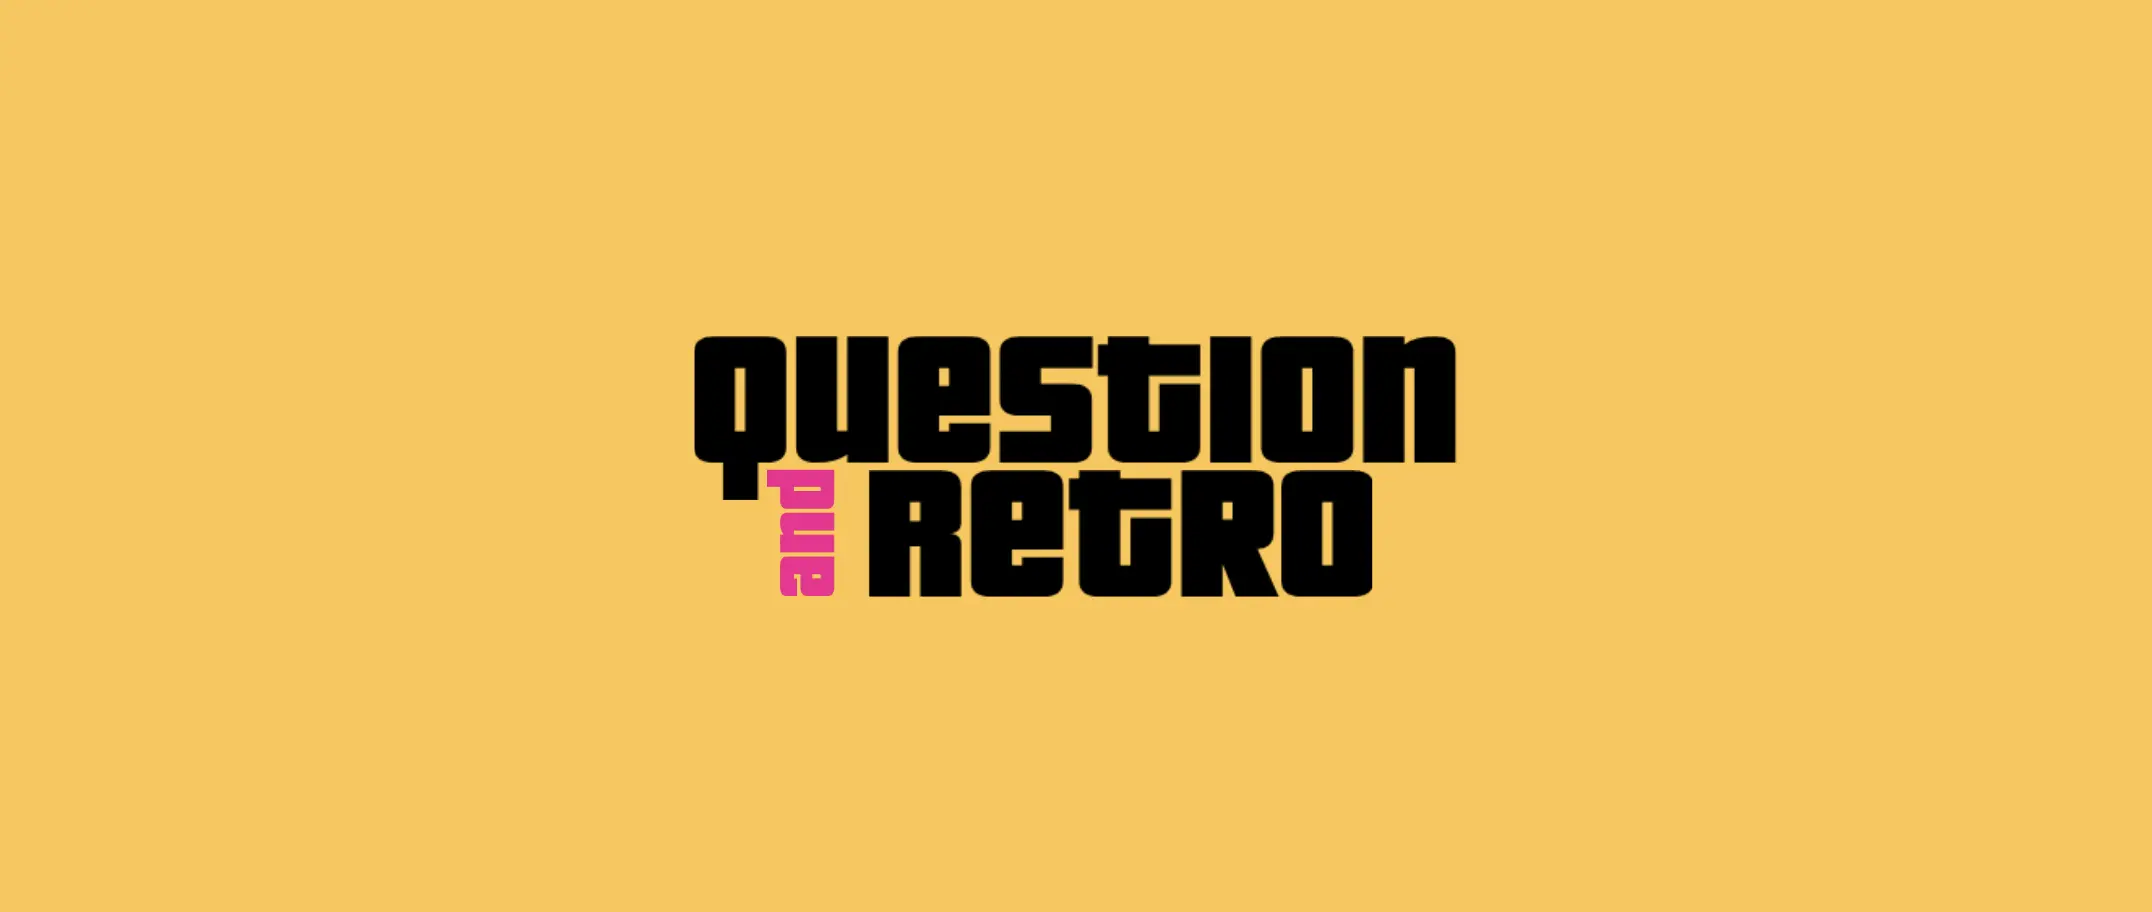 Template cover of Question & Retro